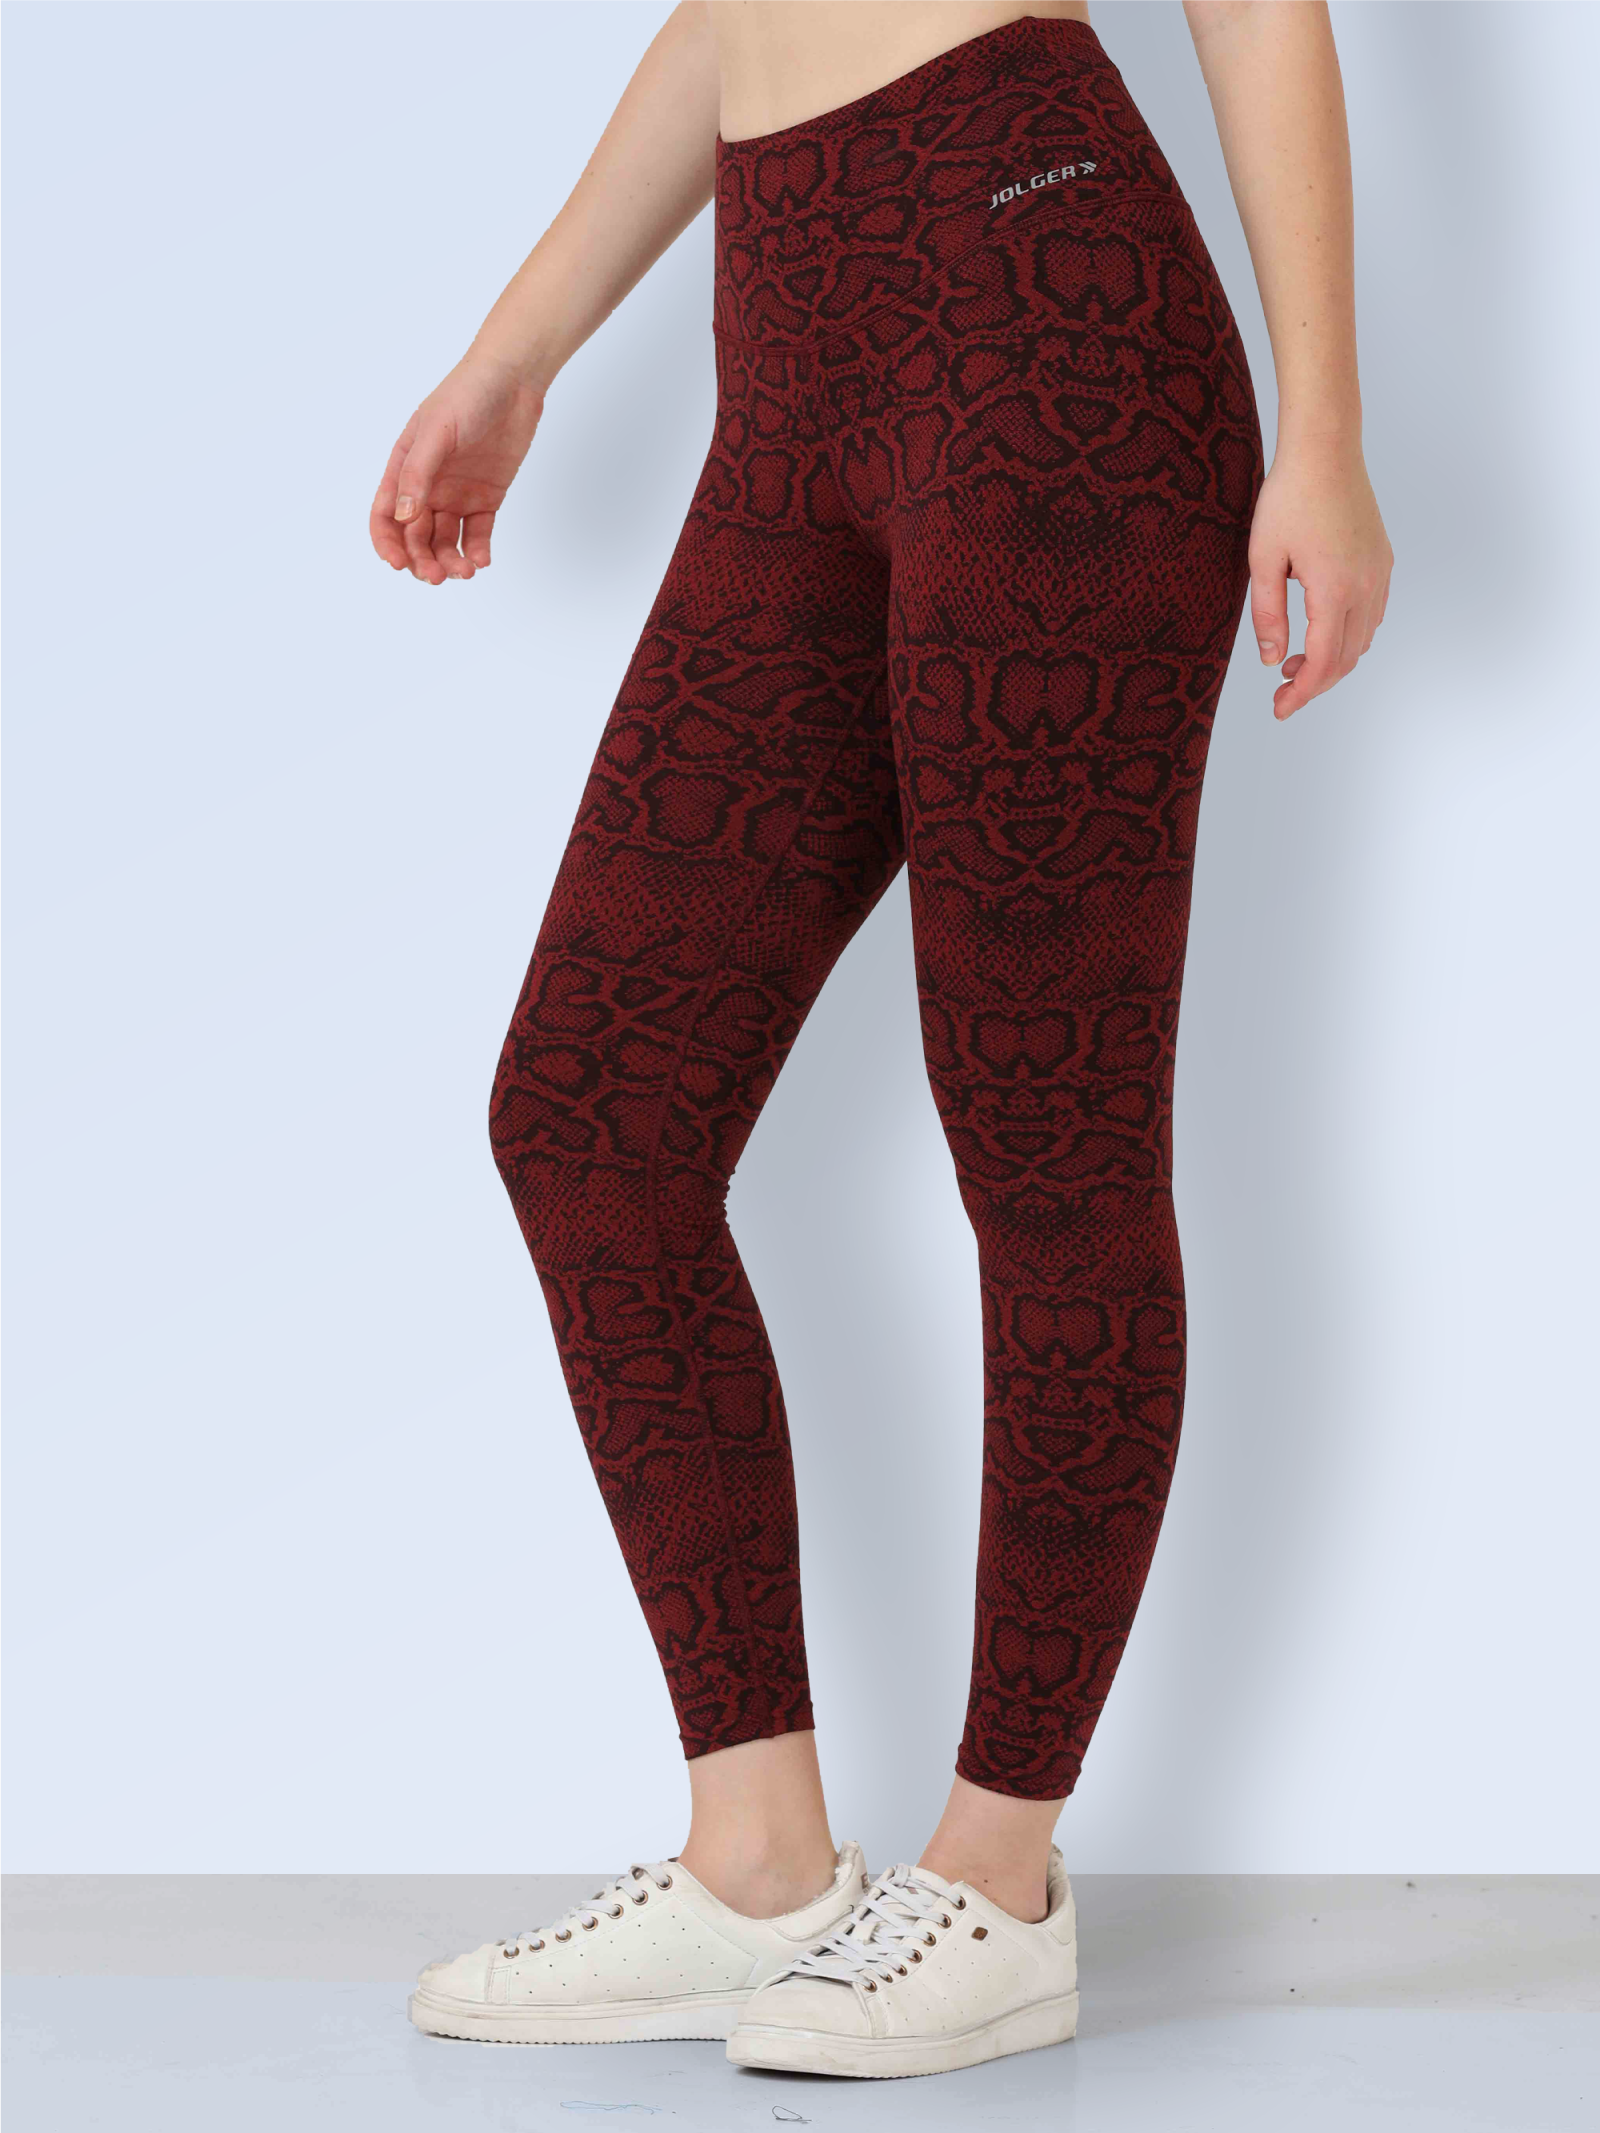 Gym & Sports Leggings For Women - maroon color